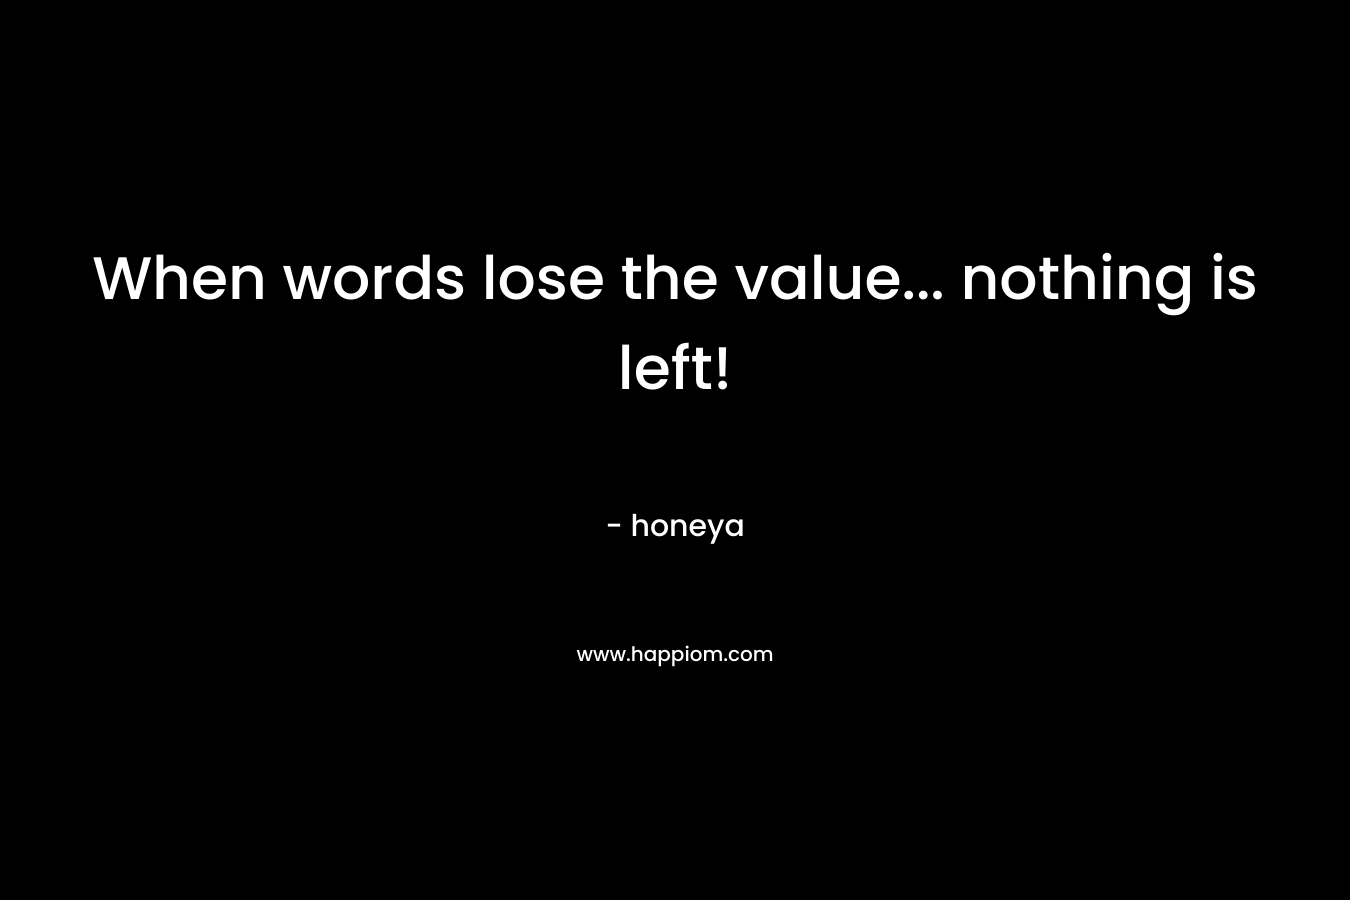 When words lose the value... nothing is left!